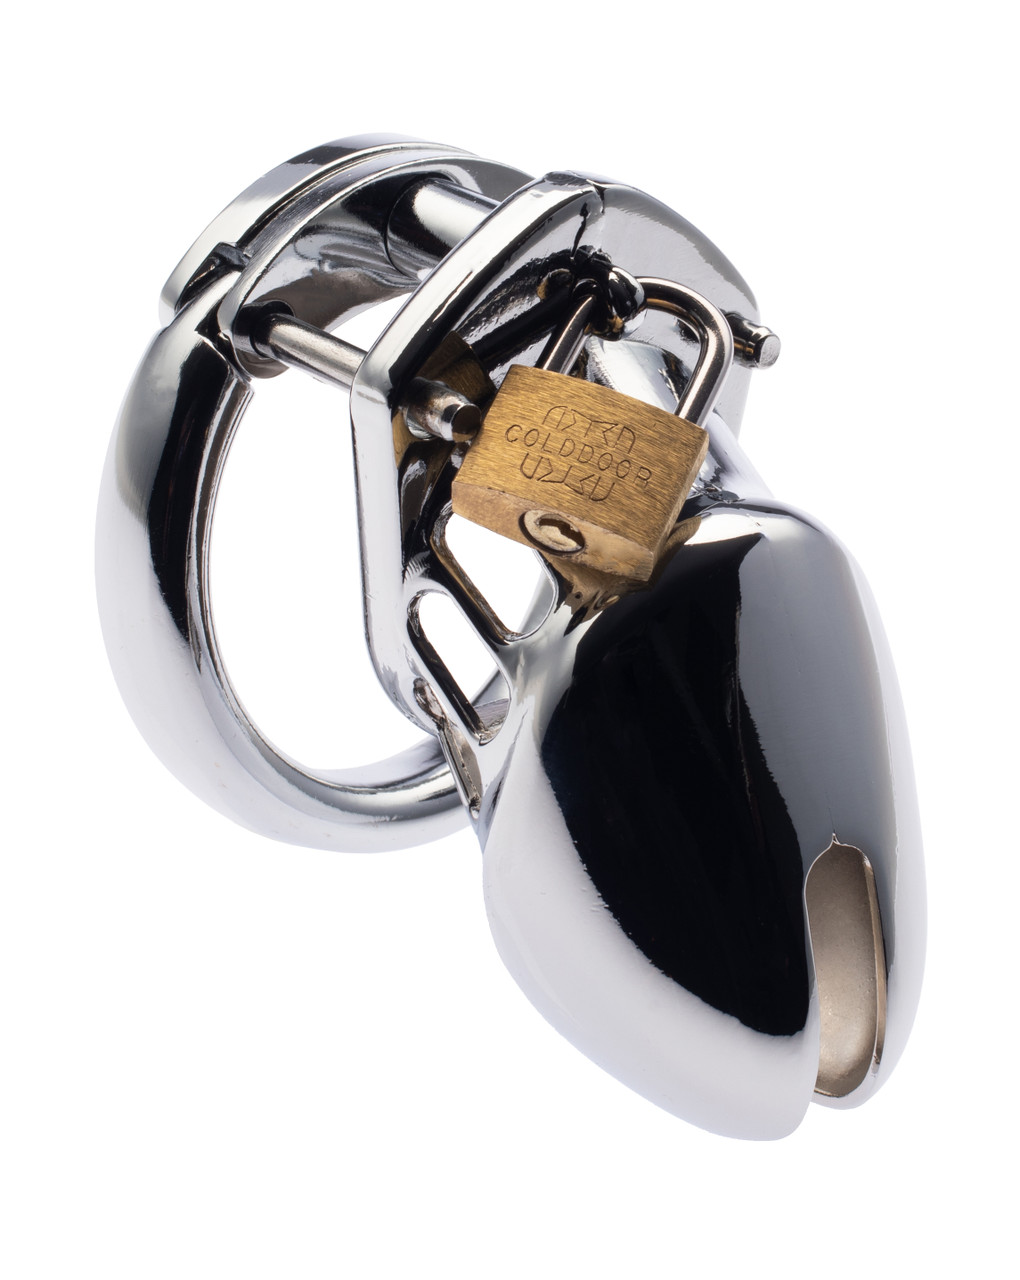 Mancage Chastity Device – Passional Boutique Store